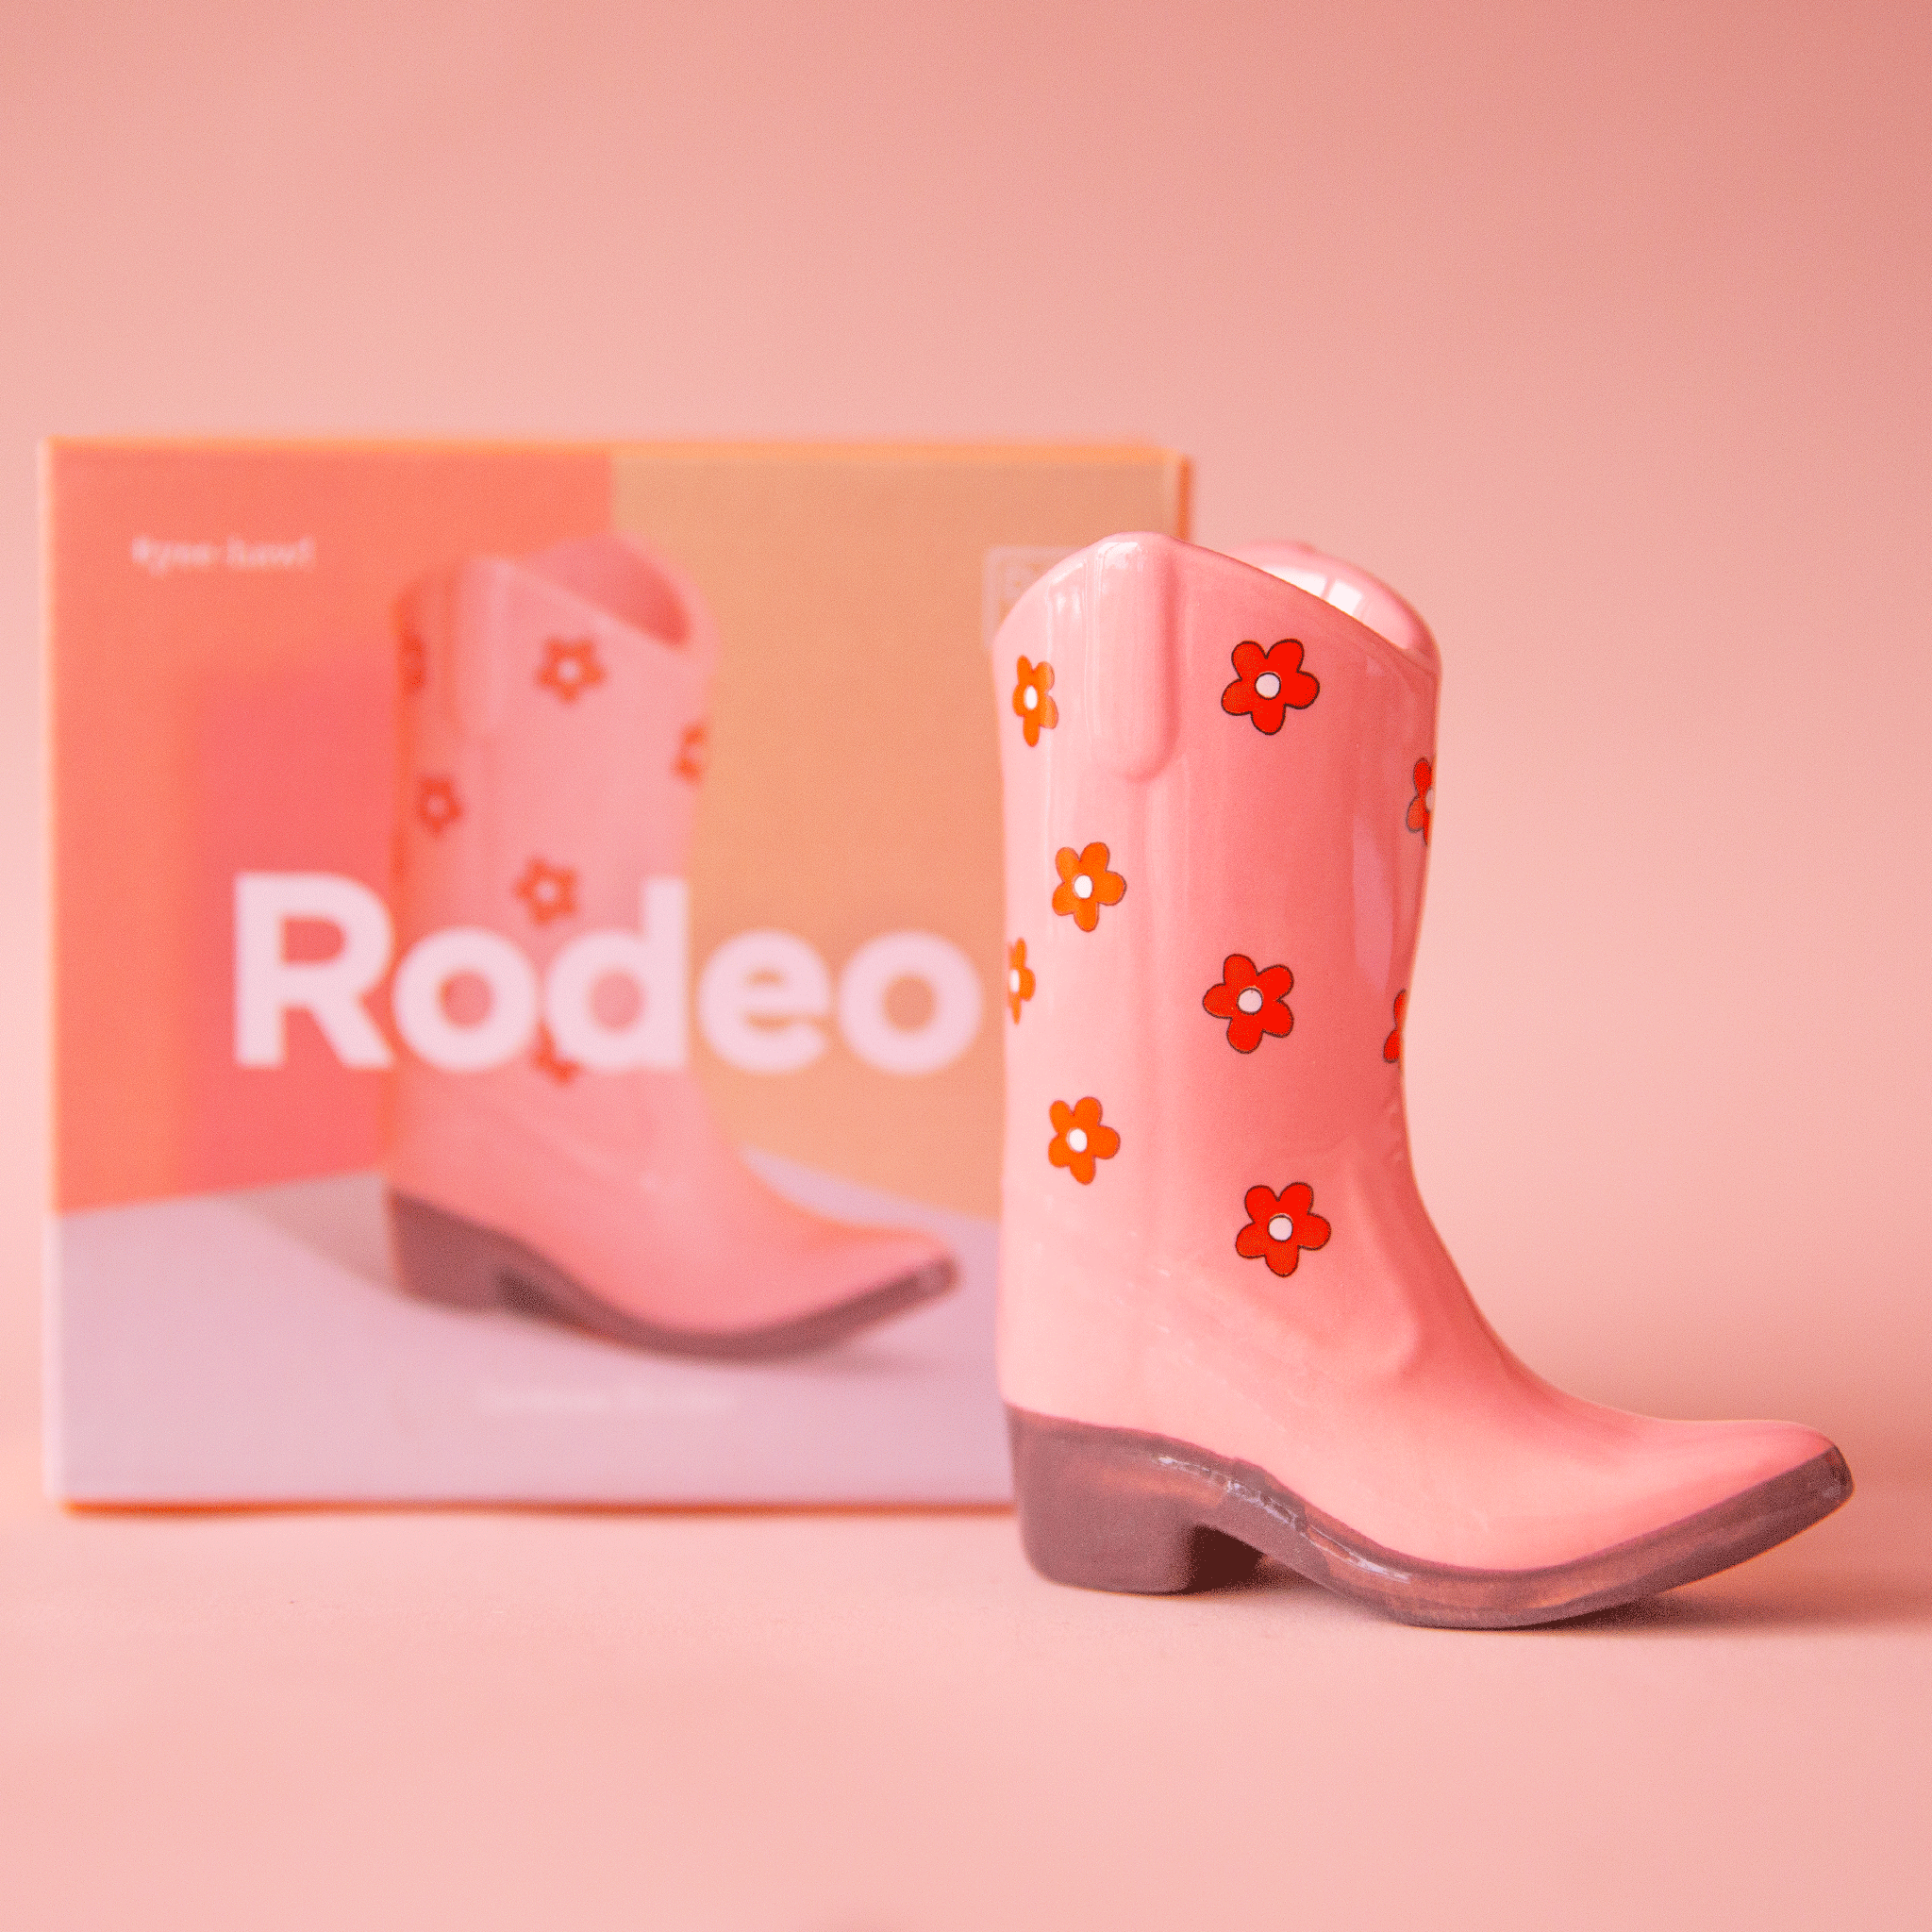 On a peach background is a pink ceramic cowboy boot shaped incense holder with a red flower print. 